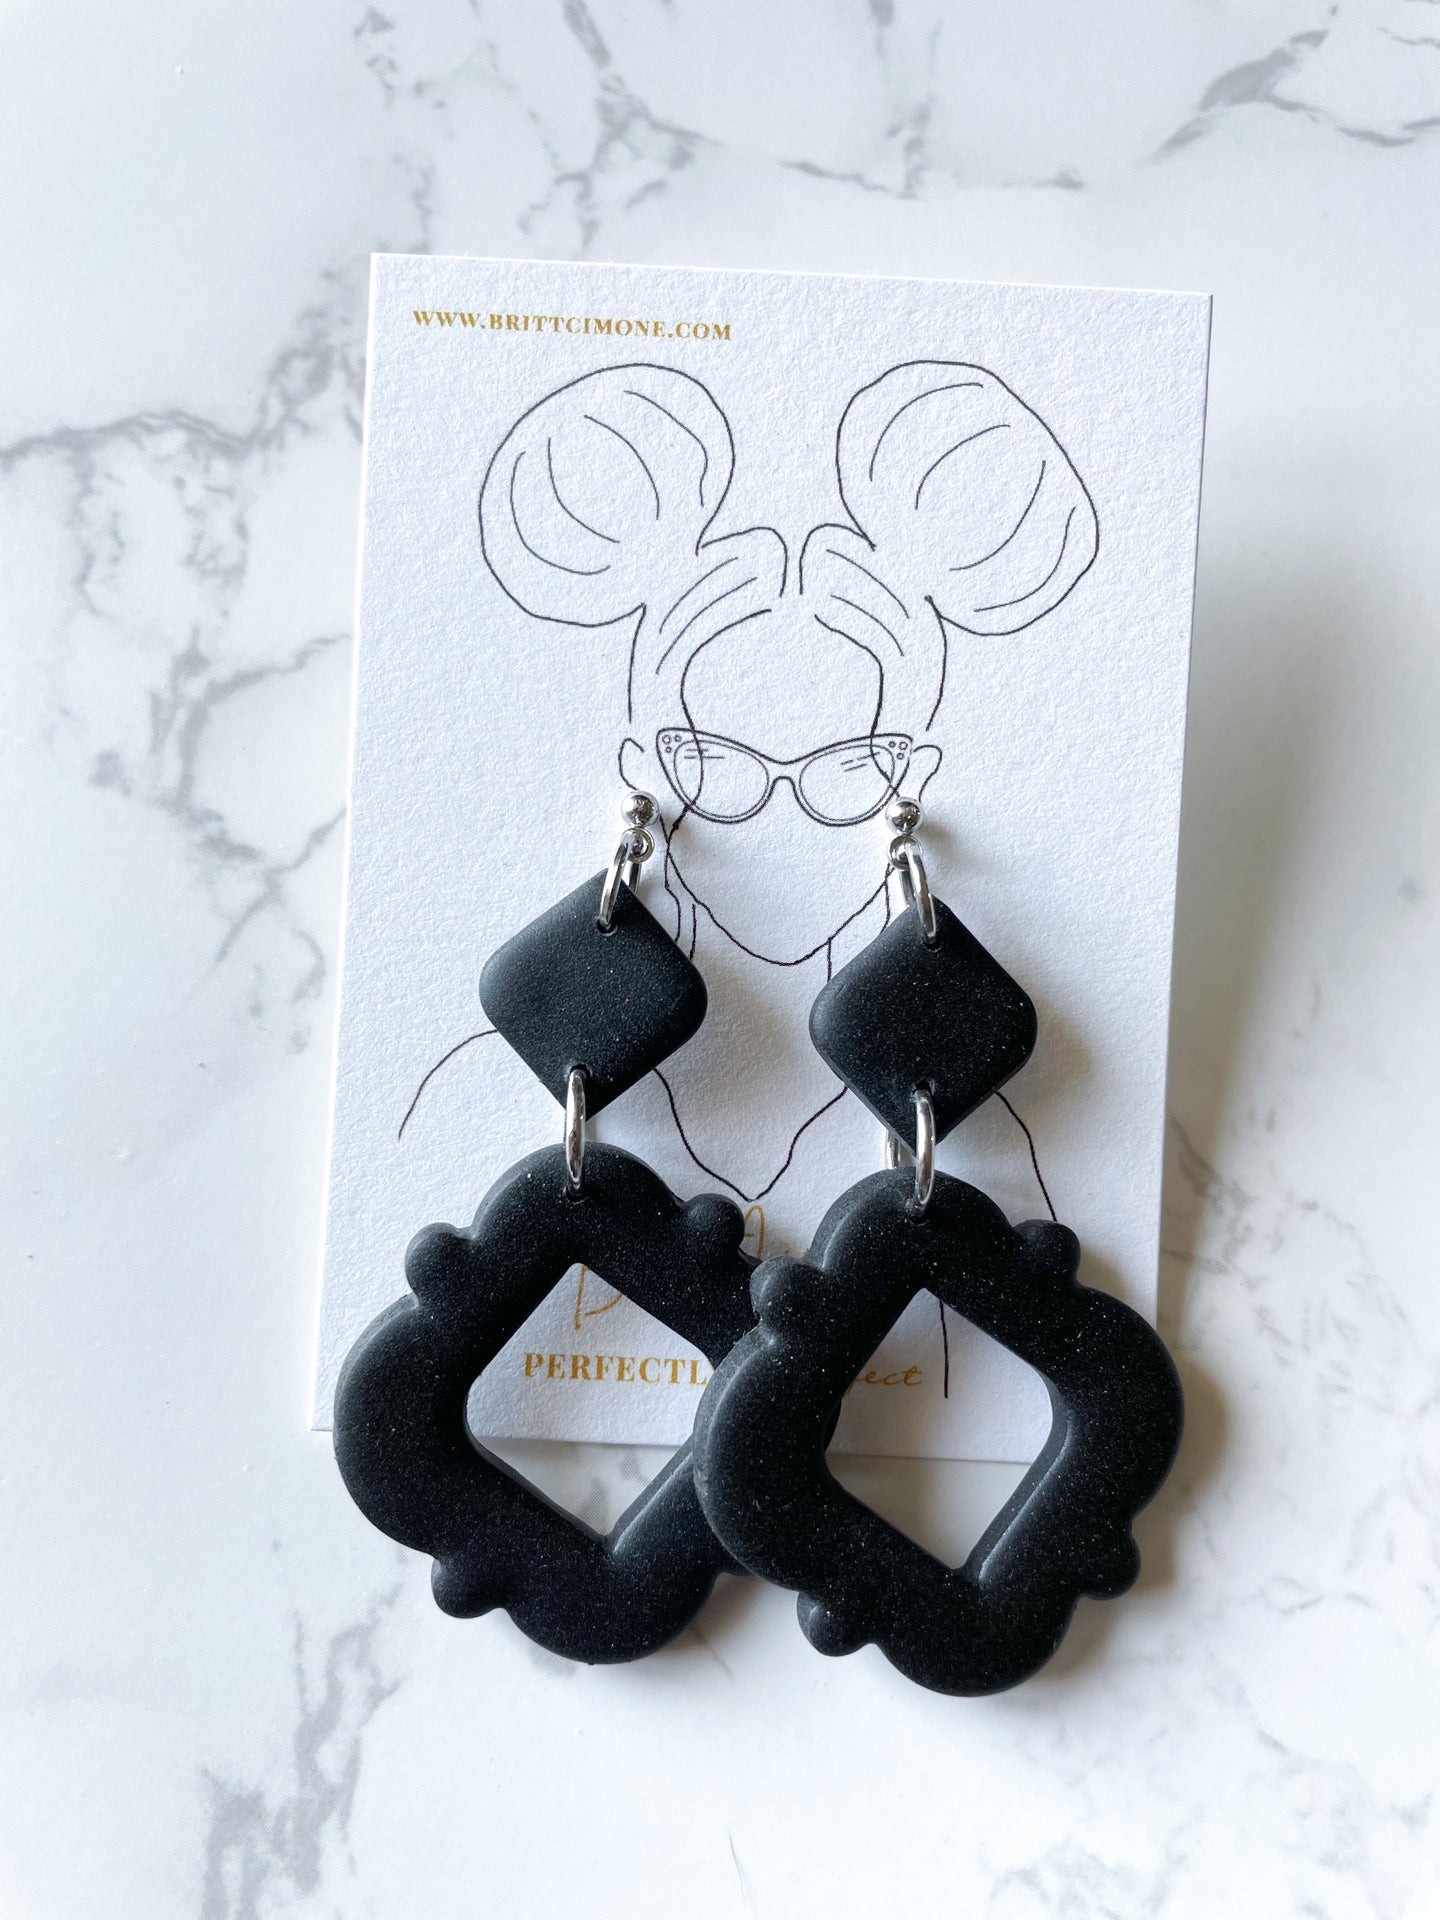 Black handmade polymer clay earrings. These are hypoallergenic earrings and super lightweight.